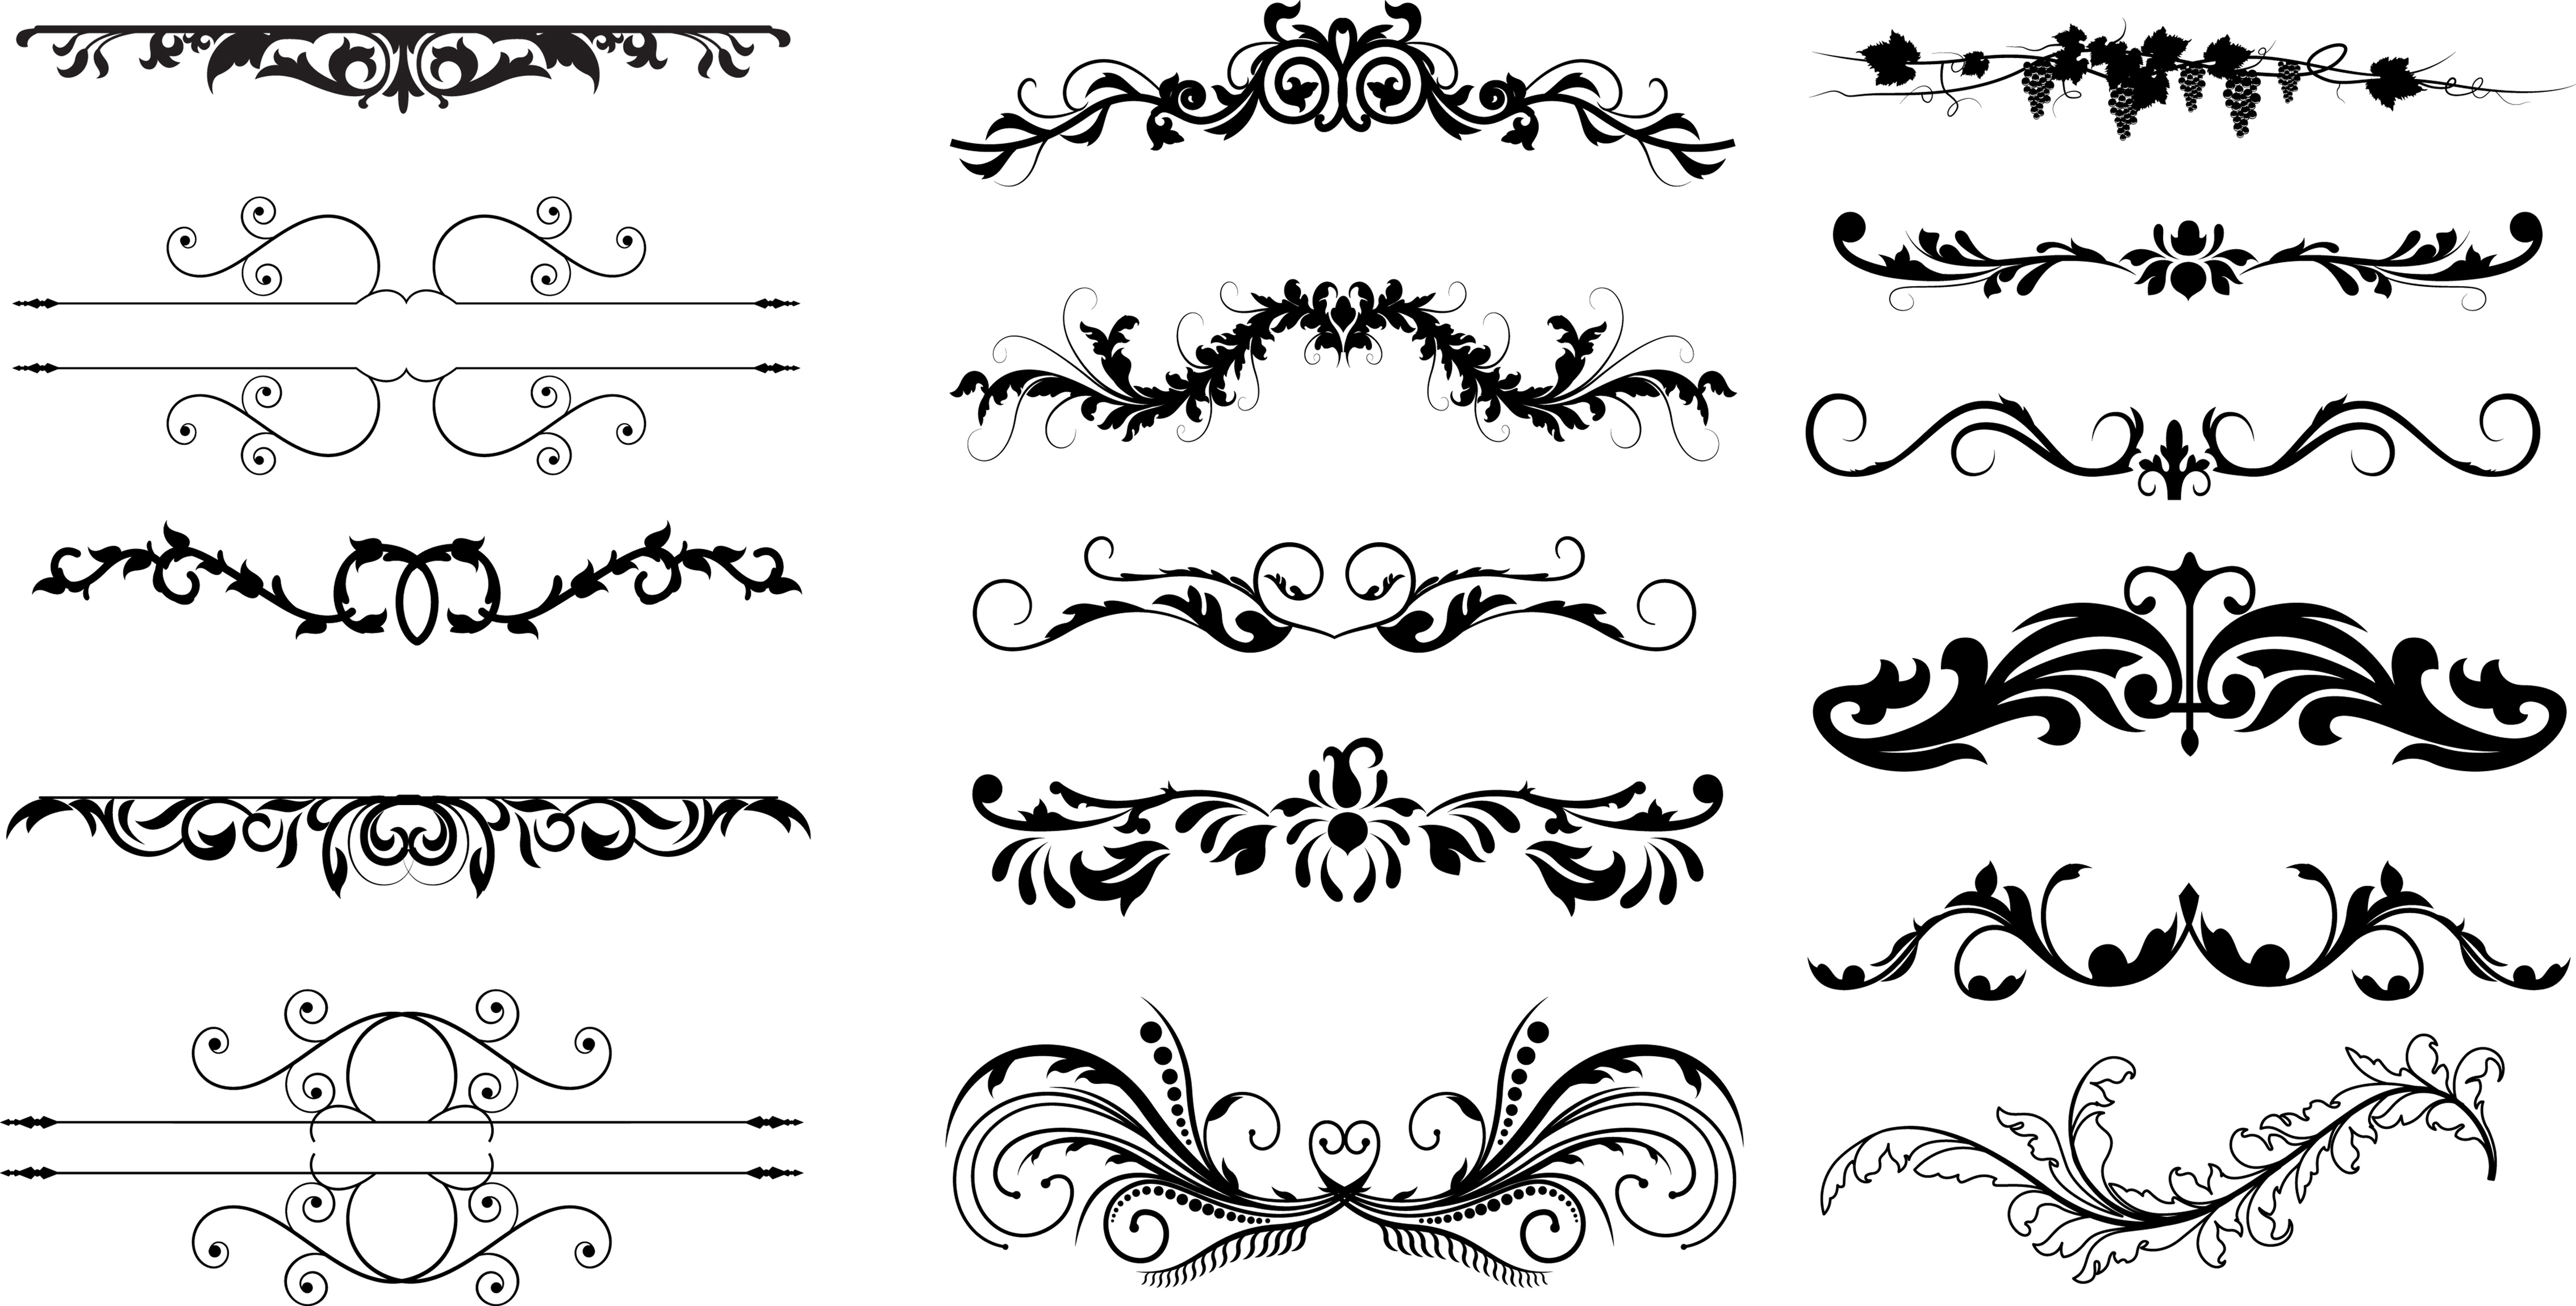 18 Art Free Vector For Images Free Vector Art